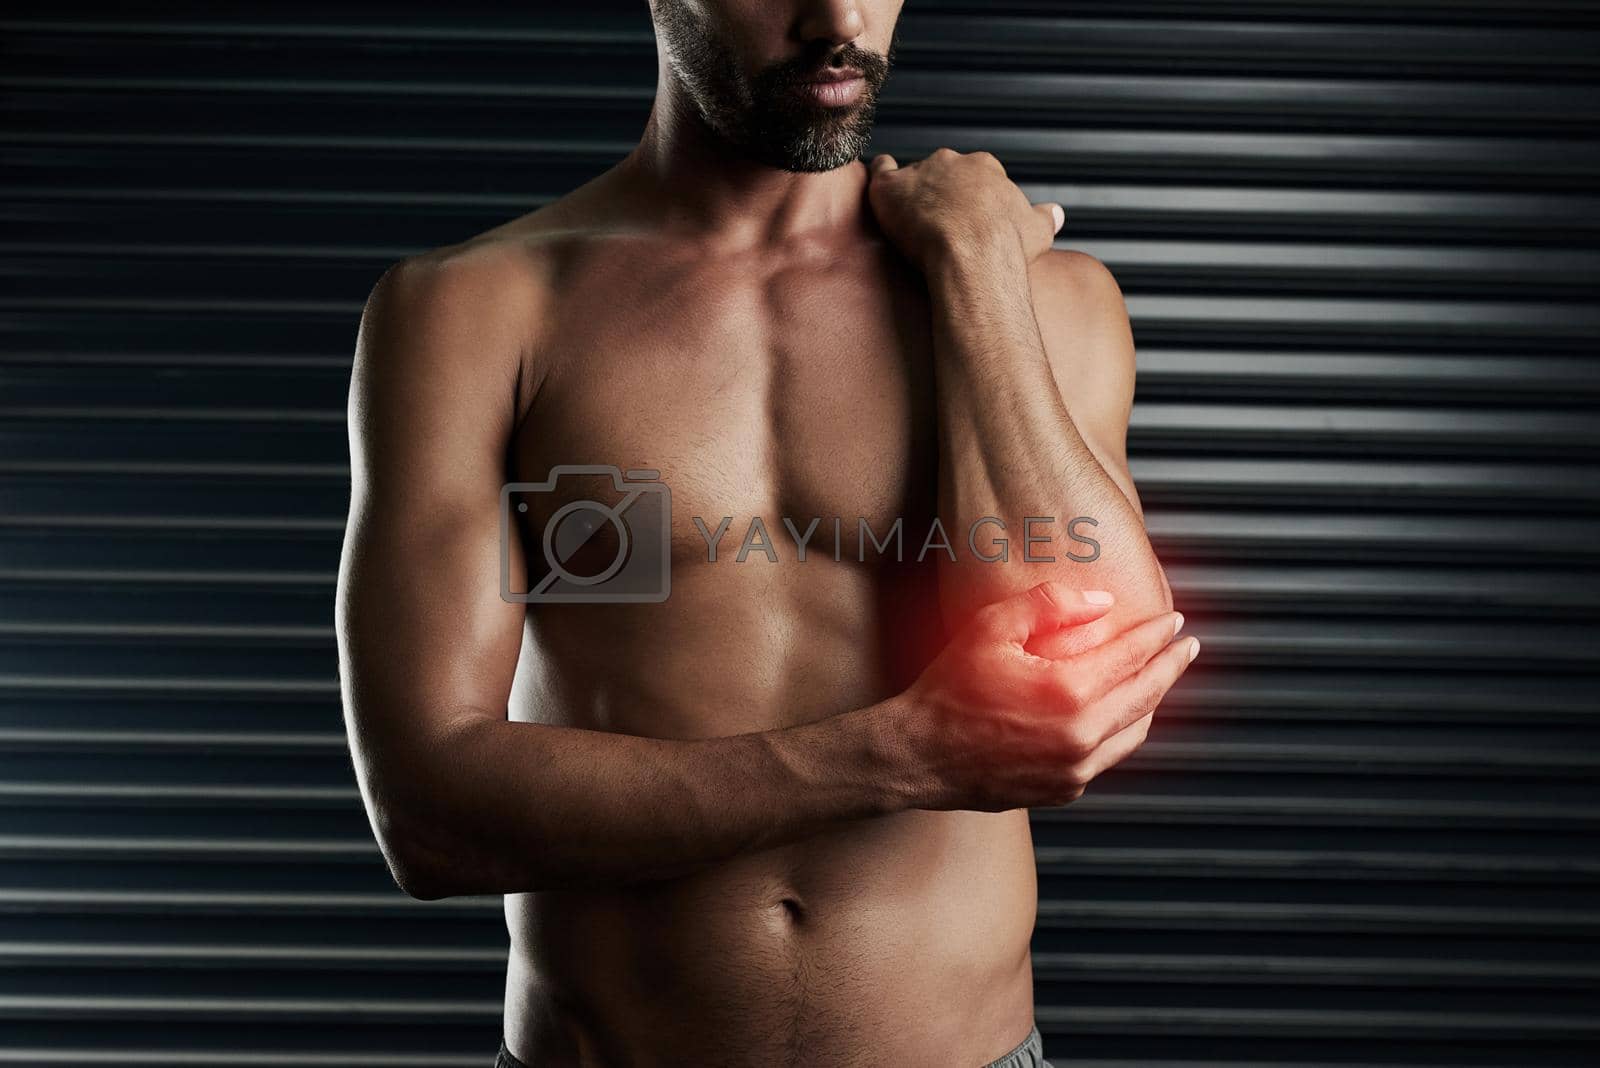 Royalty free image of Worked out a little too hard today.... Studio shot of a muscular young man with cgi highlighting an inflammation in his elbow. by YuriArcurs